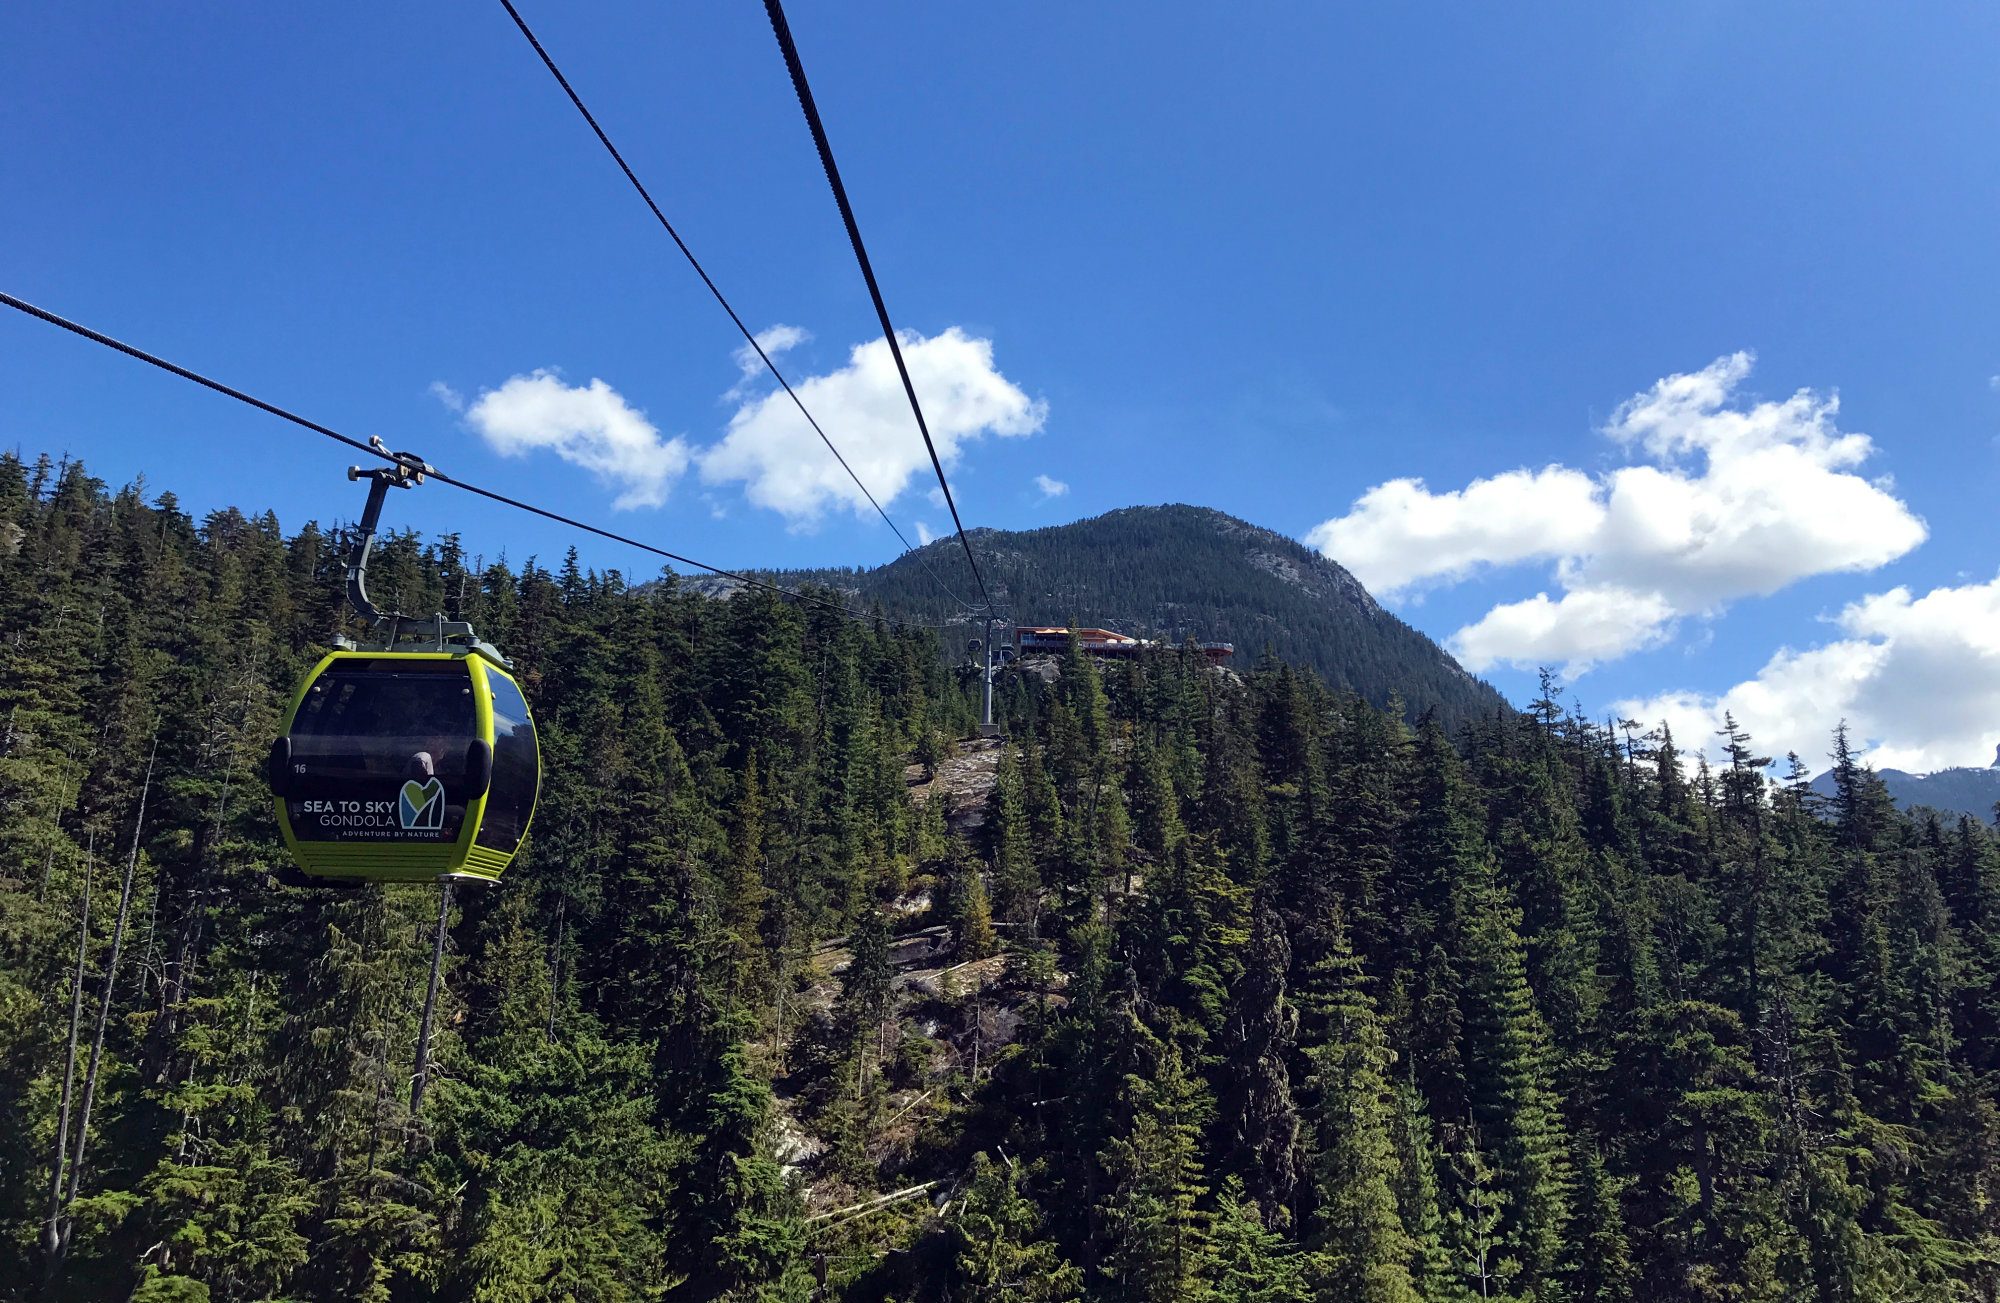 Sea To Sky Gondola, Vancouver Area Attractions, Squamish, Whistler, Vancouver